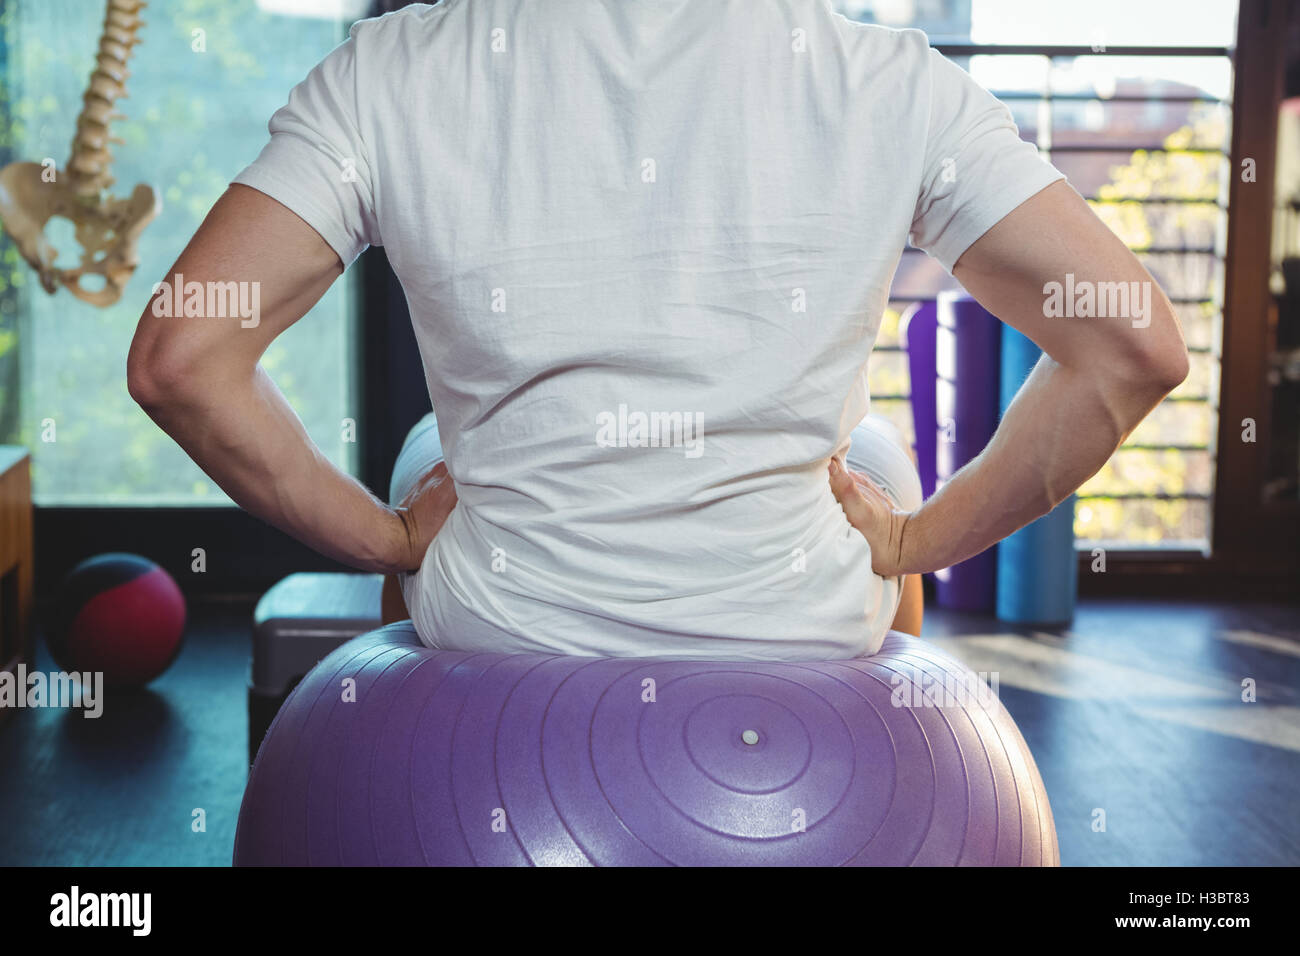 Male patient sitting on exercise ball Banque D'Images